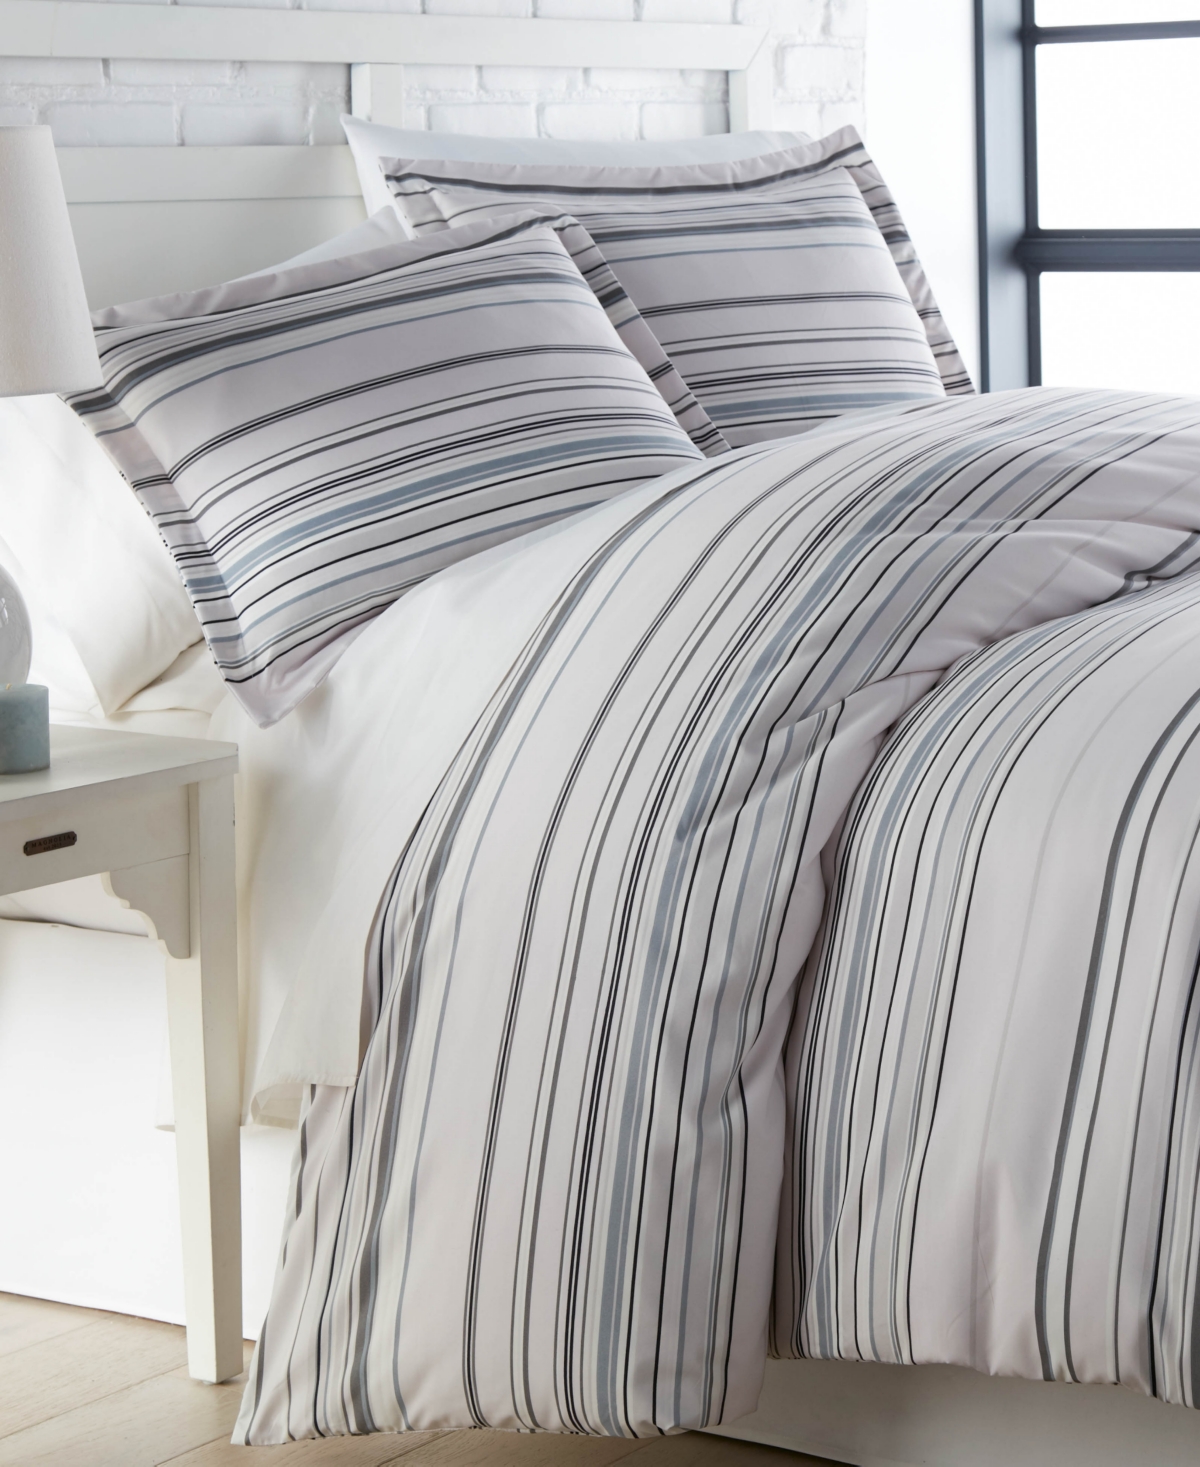 Southshore Fine Linens Stripe 3 Piece Comforter And Sham Set, Full/queen In Gray